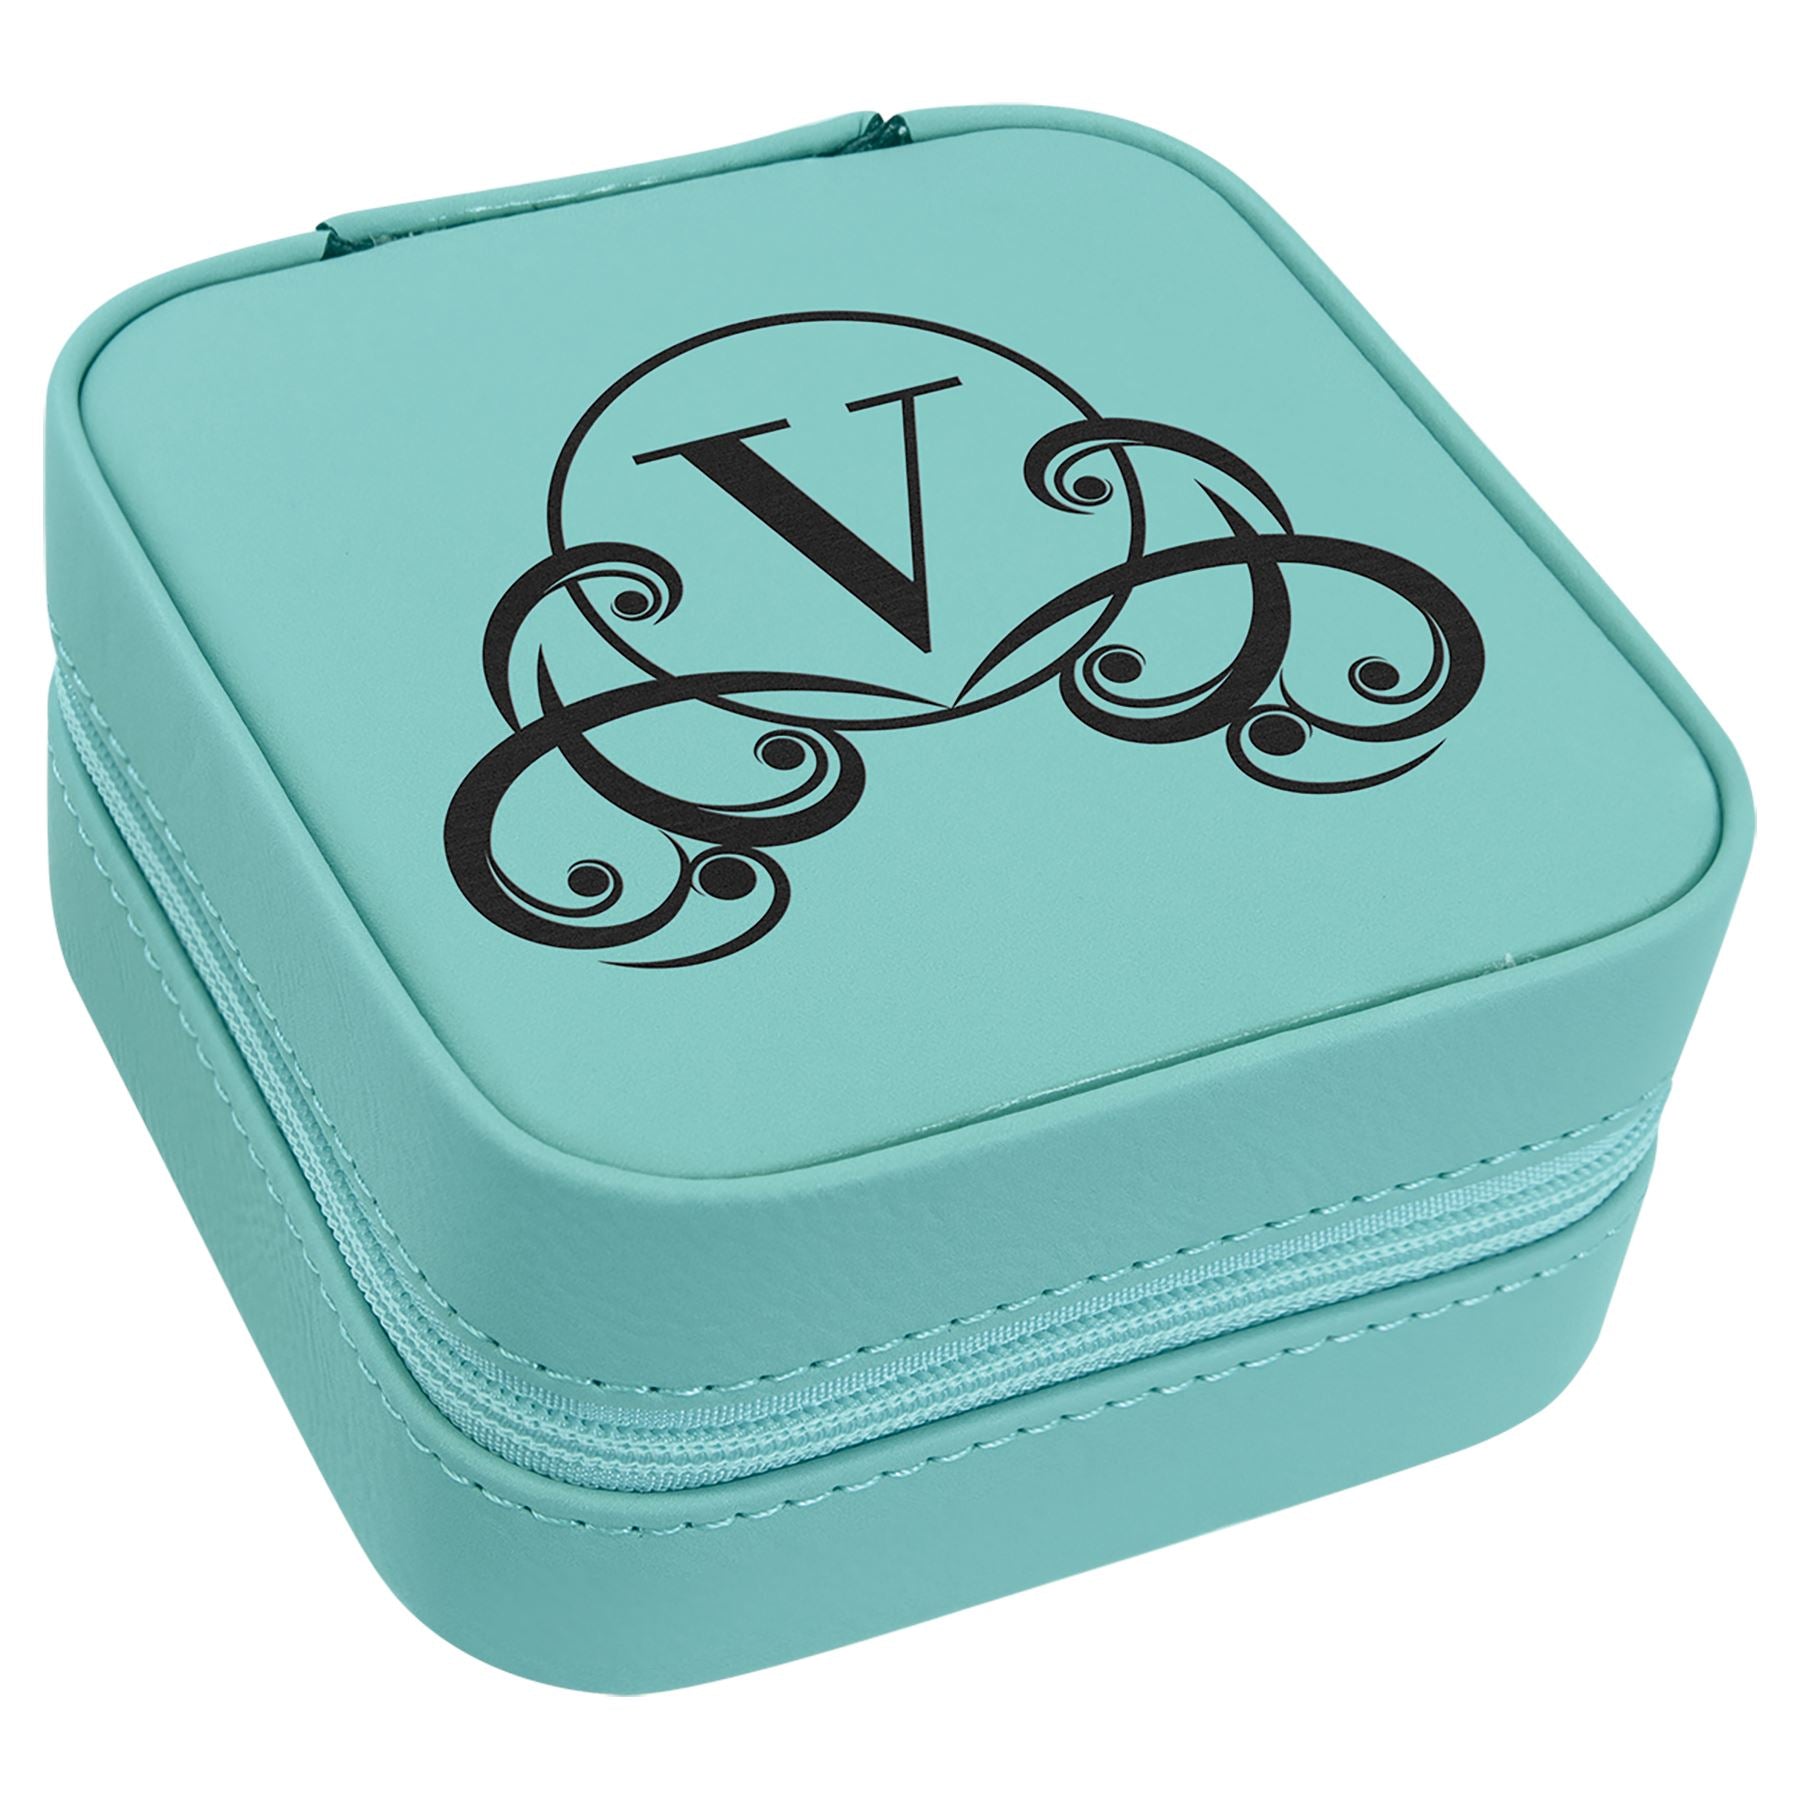 Travel Jewelry Box, Laserable Leatherette, Laser Engraved Jewelry Box Craftworks NW Teal/Black 